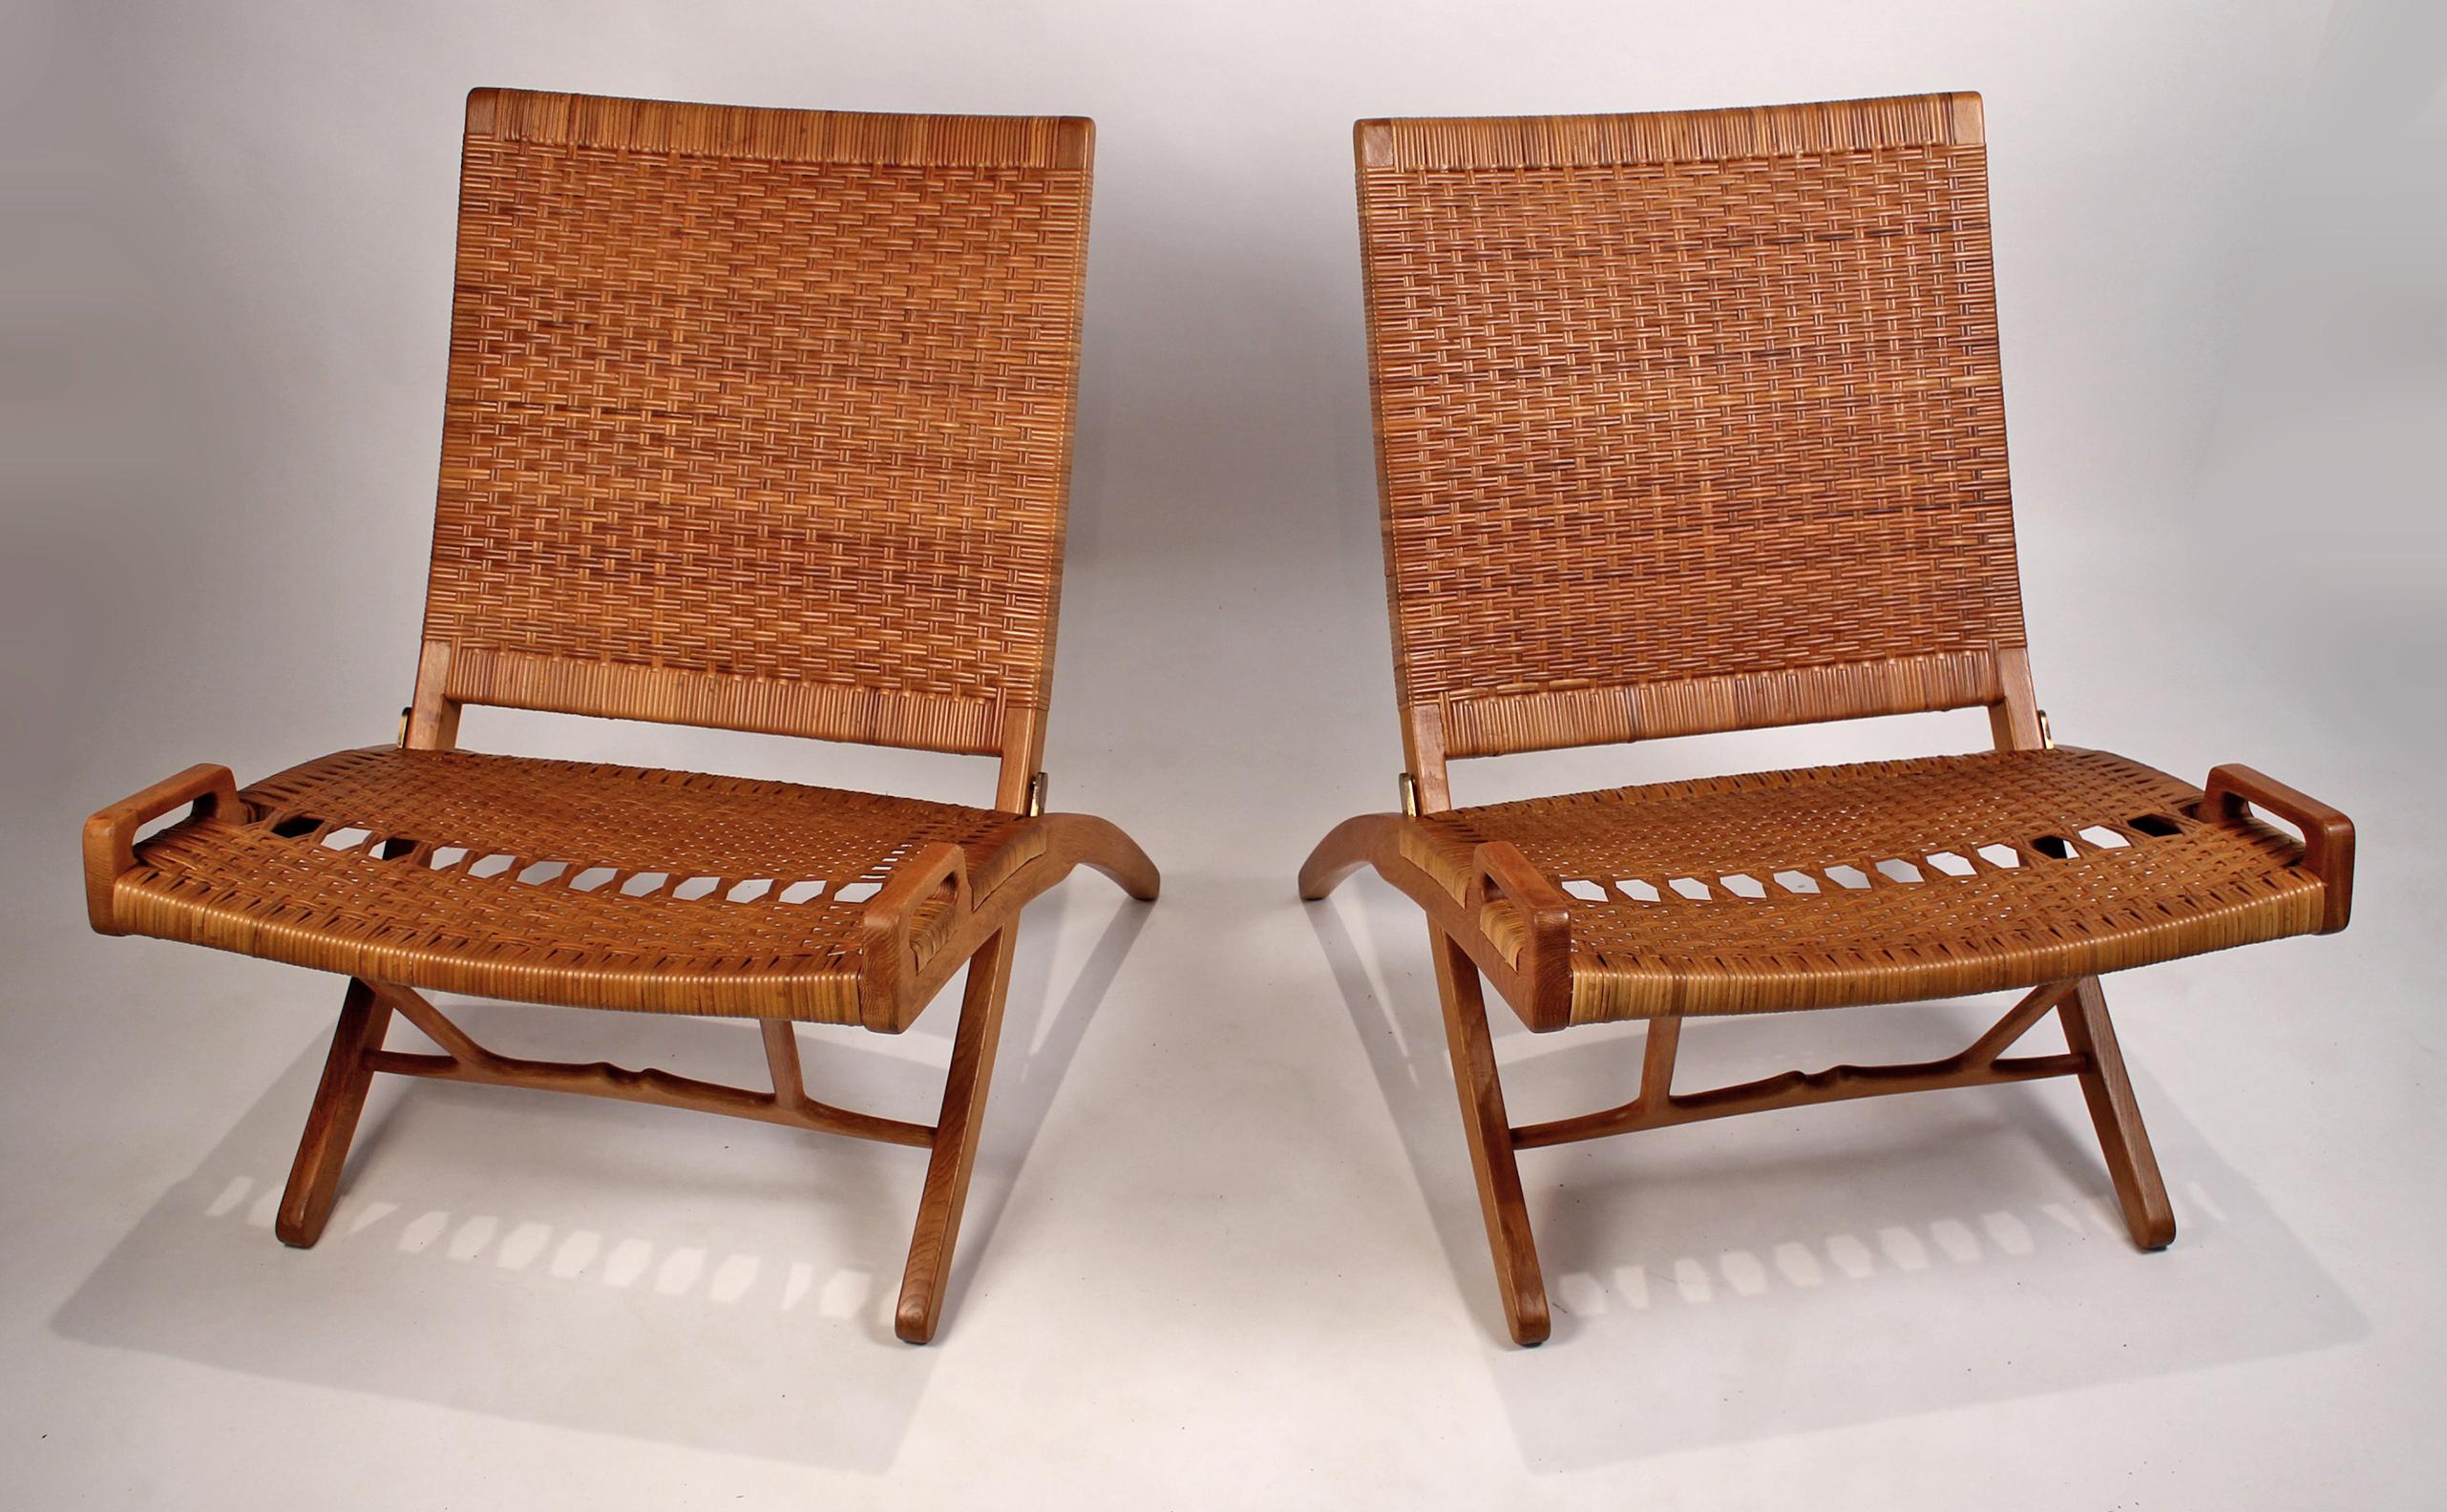 This pair of Danish modern masterpieces is in excellent condition with no breaks to the cane. The oak is also in fine condition. Original 1950s JH stamps are visible on both chairs.